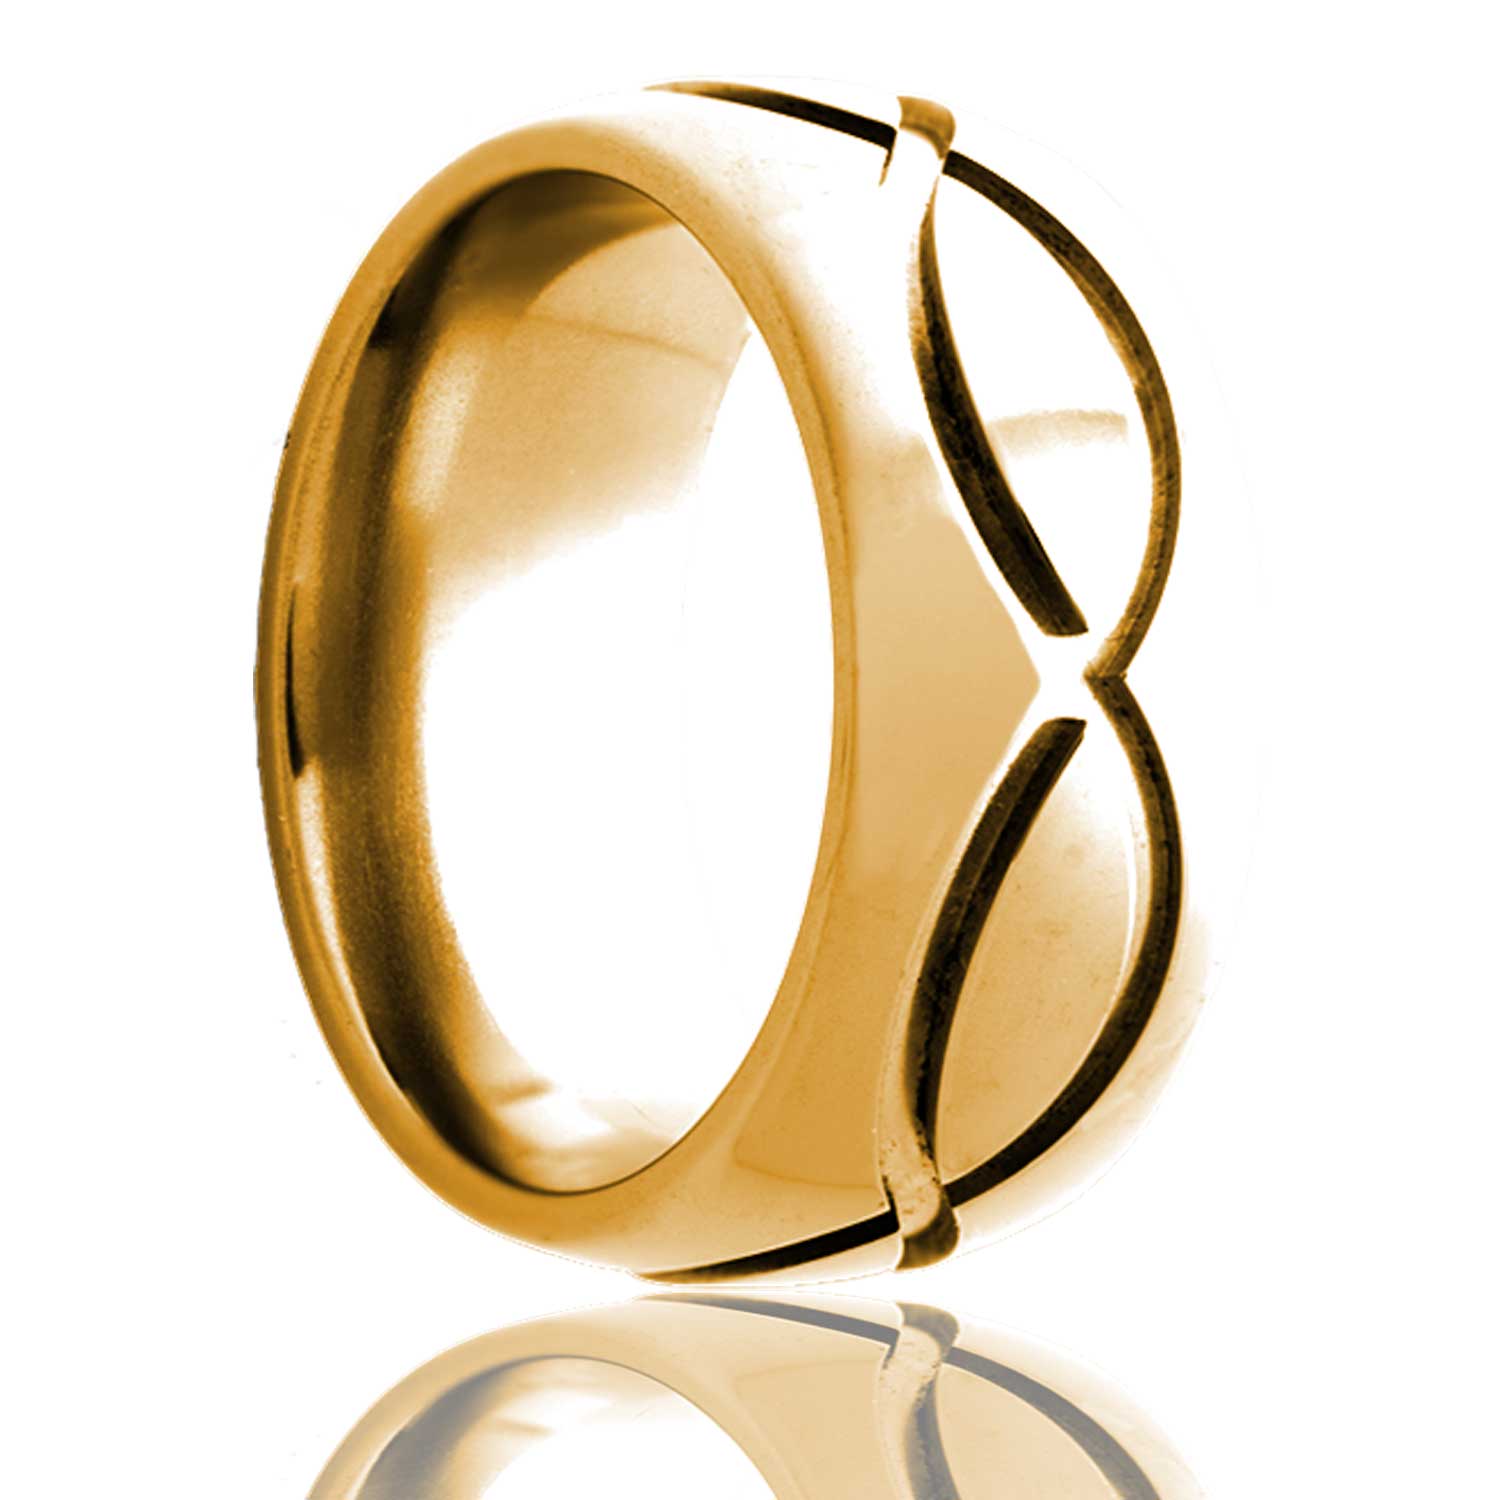 A infinity waves domed 14k gold wedding band displayed on a neutral white background.